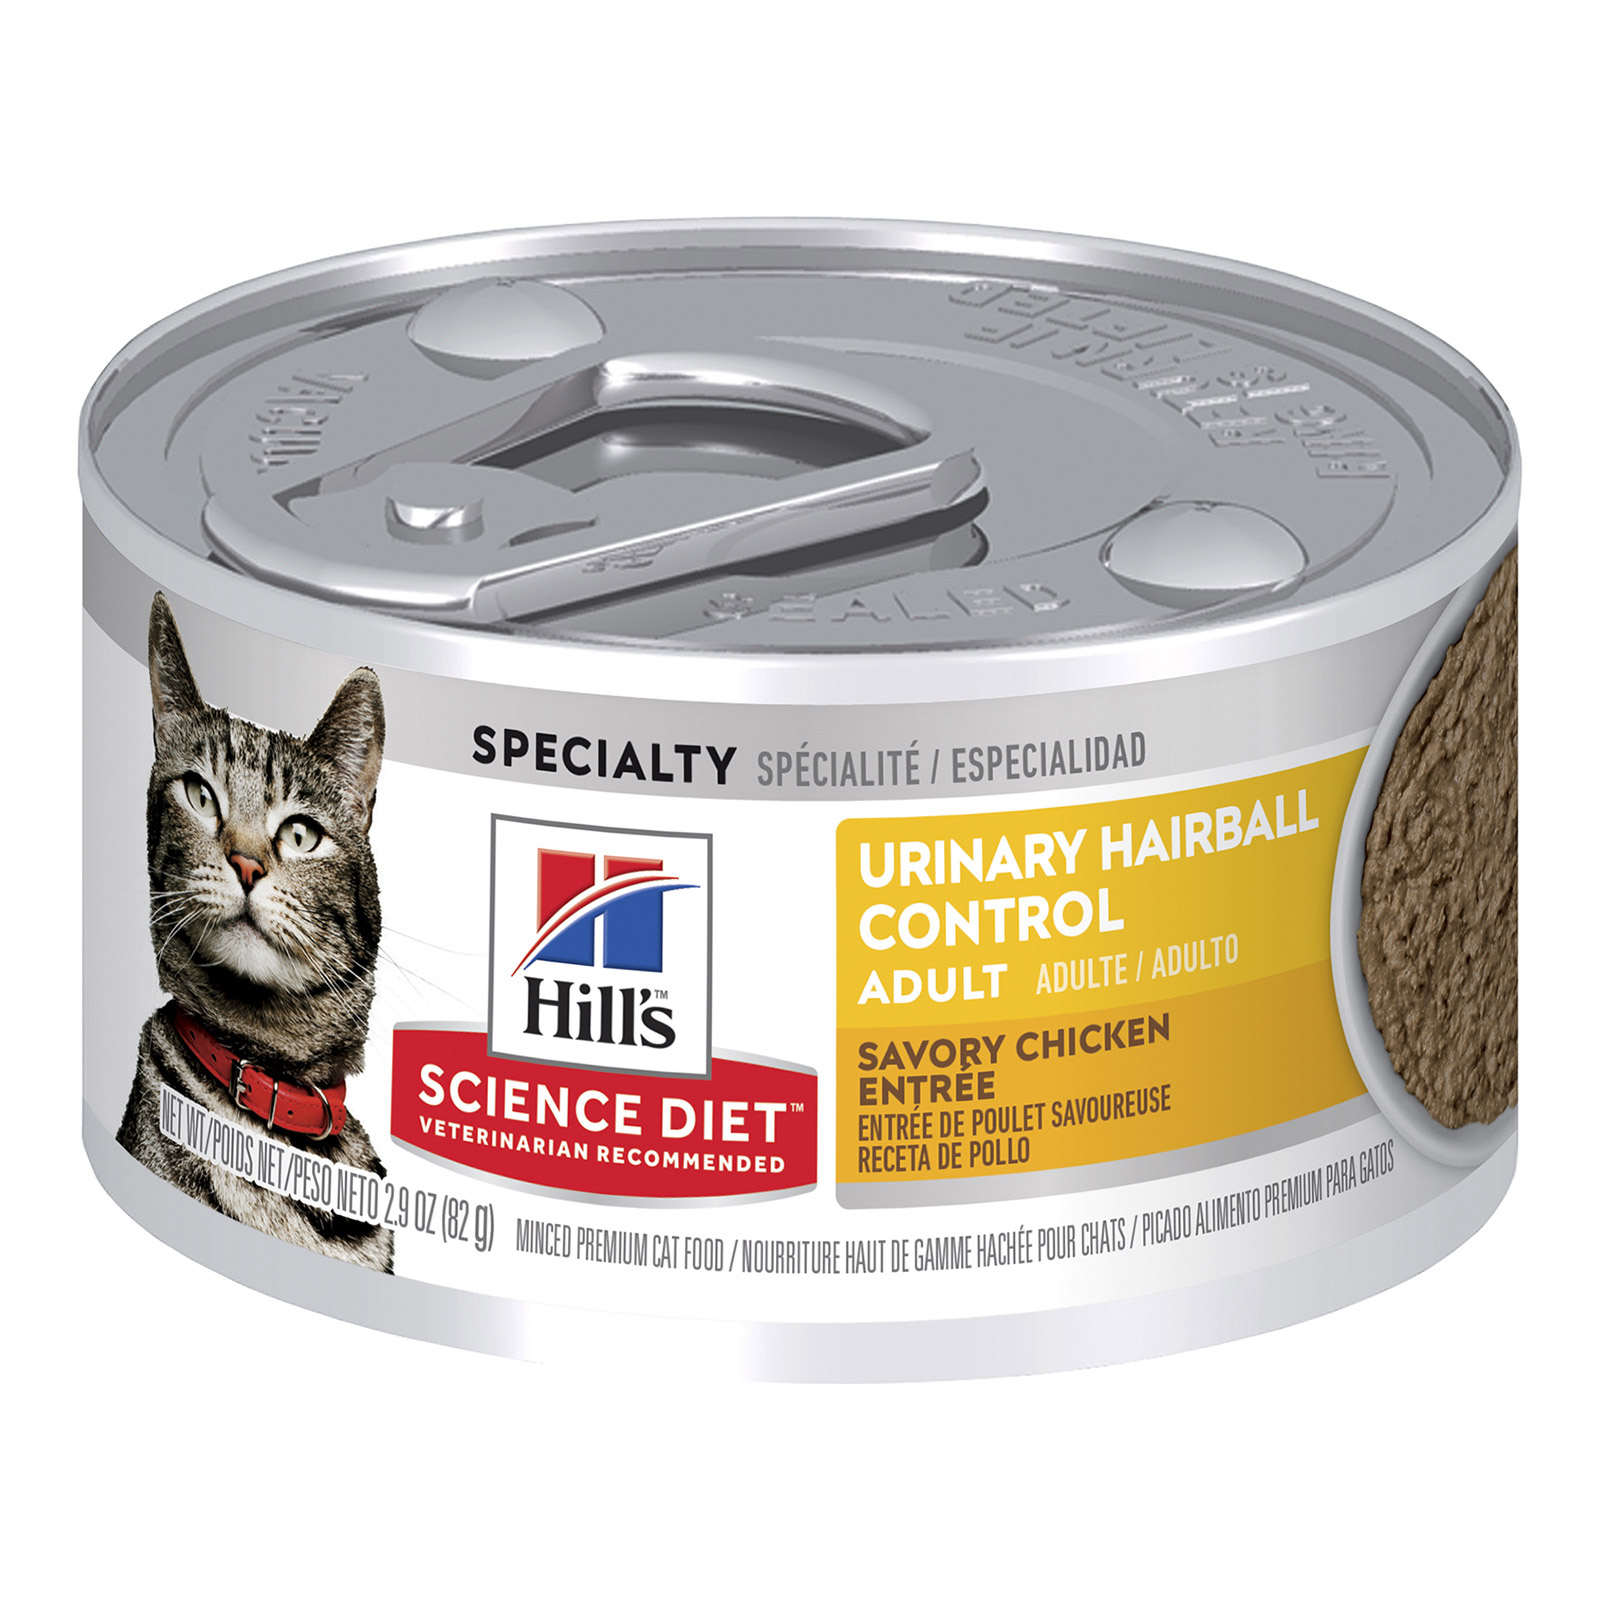 Hill's Science Diet Adult Urinary Hairball Control Canned Cat Food 82 gm